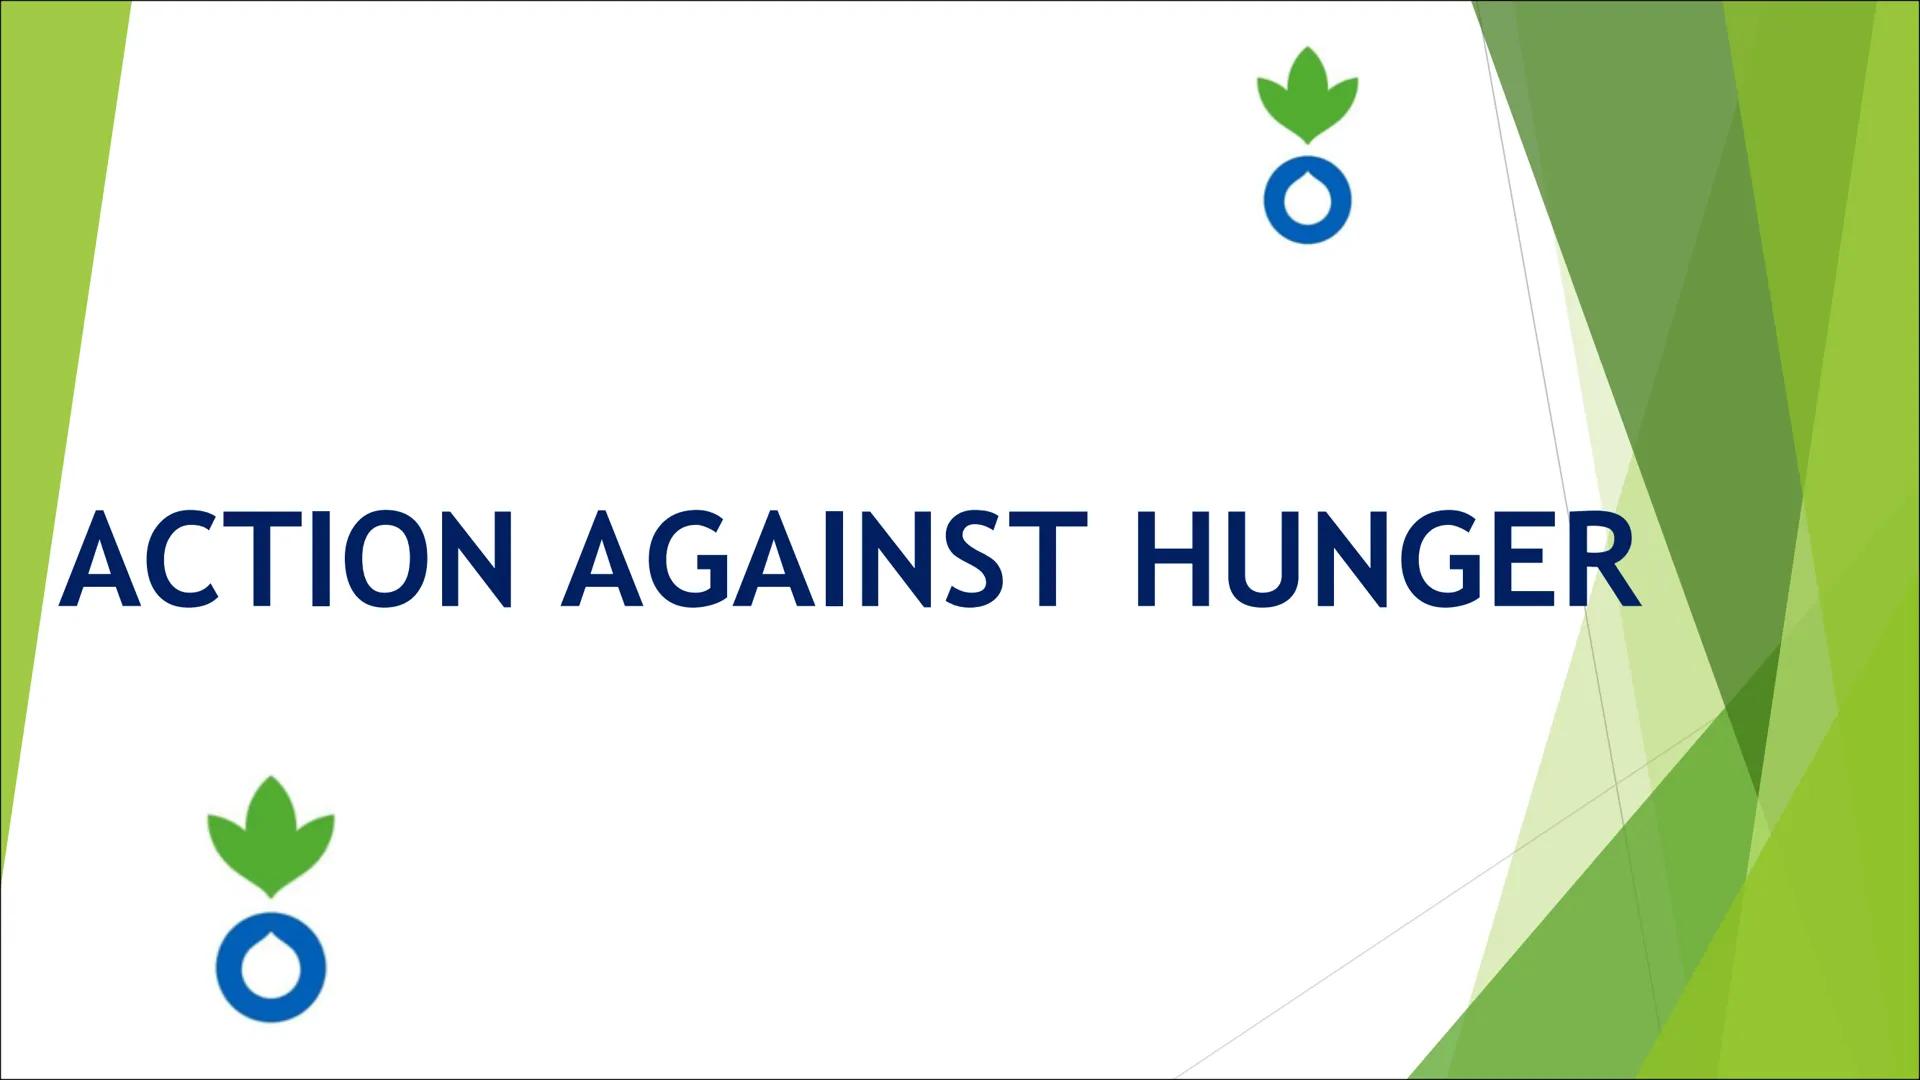 ACTION AGAINST HUNGER
O ACTION
AGAINST
HUNGER
Structure
1. General information
2. History and development
3. What does the organisation do?
